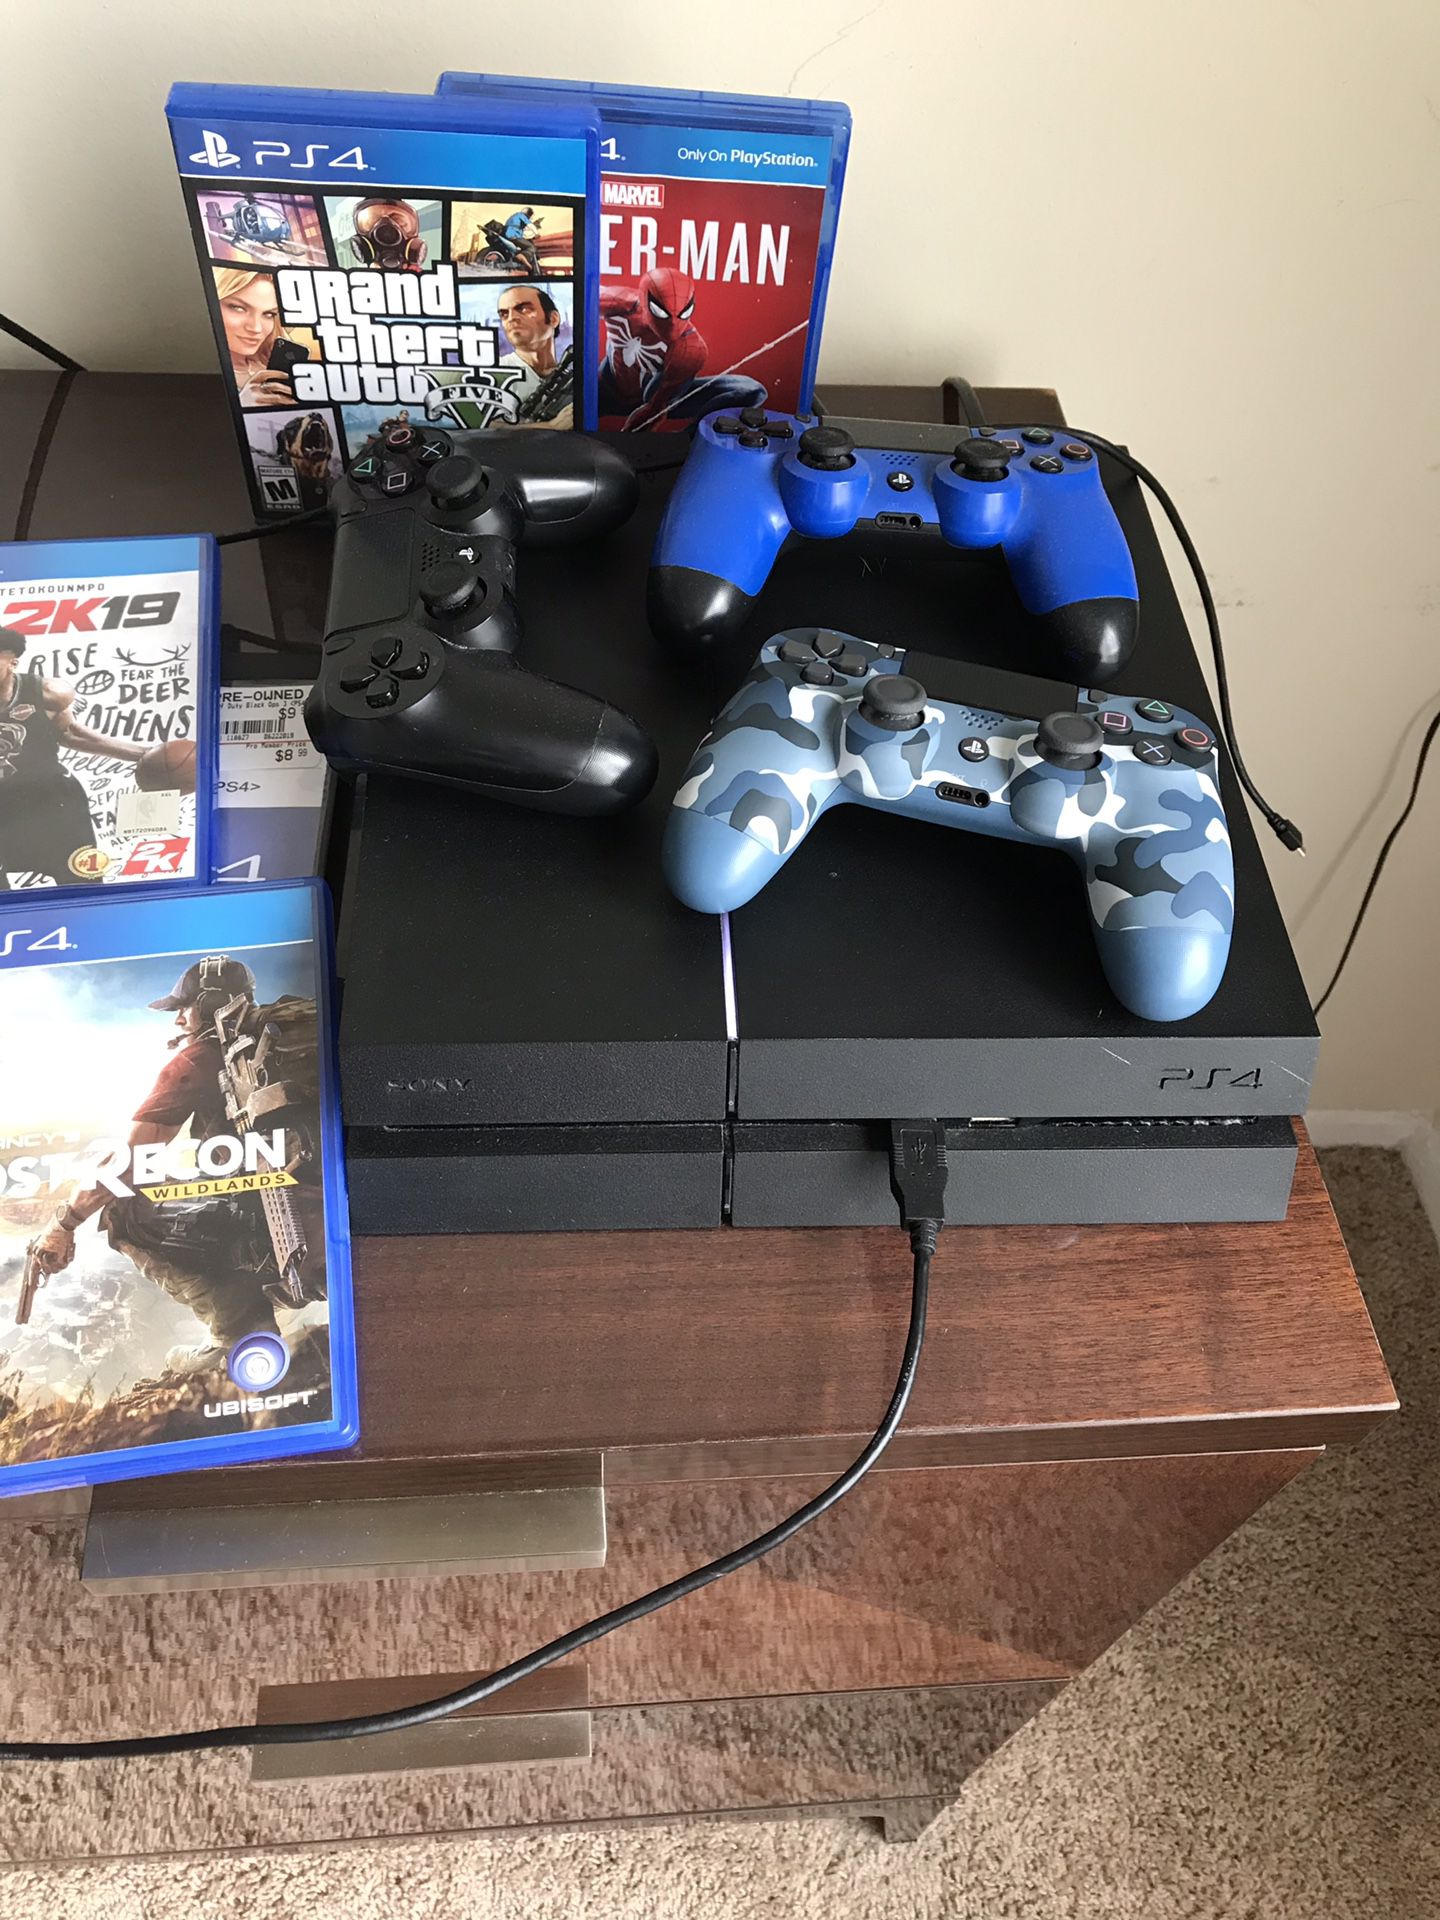 Ps4, 2 controllers, 1 new controller, 5 games